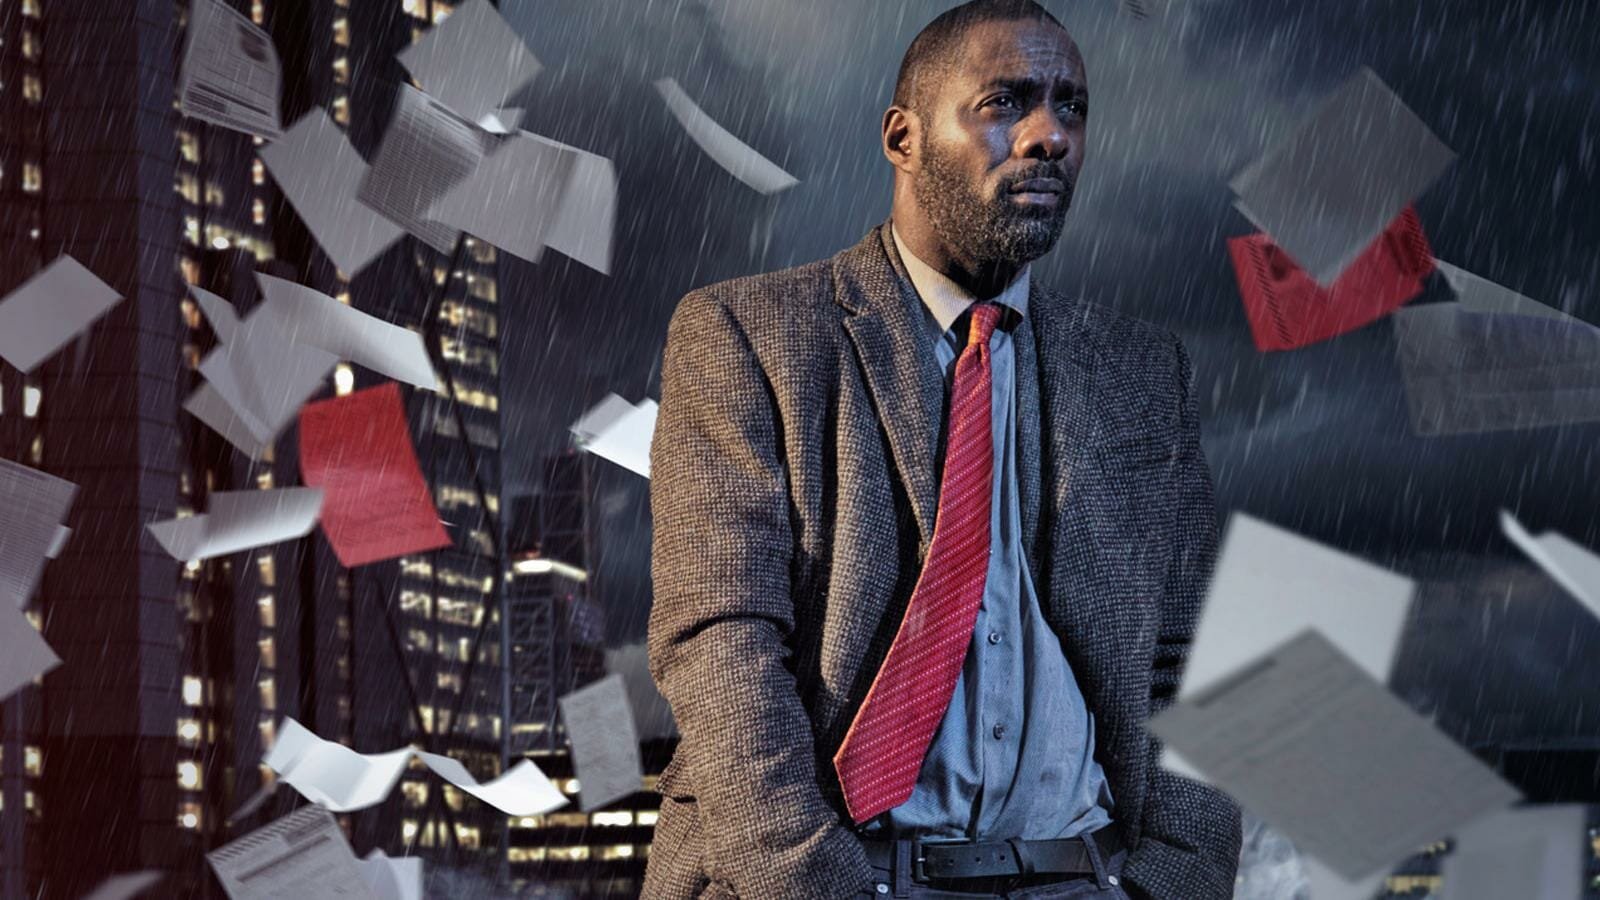 Best shows on HBO max: Luther